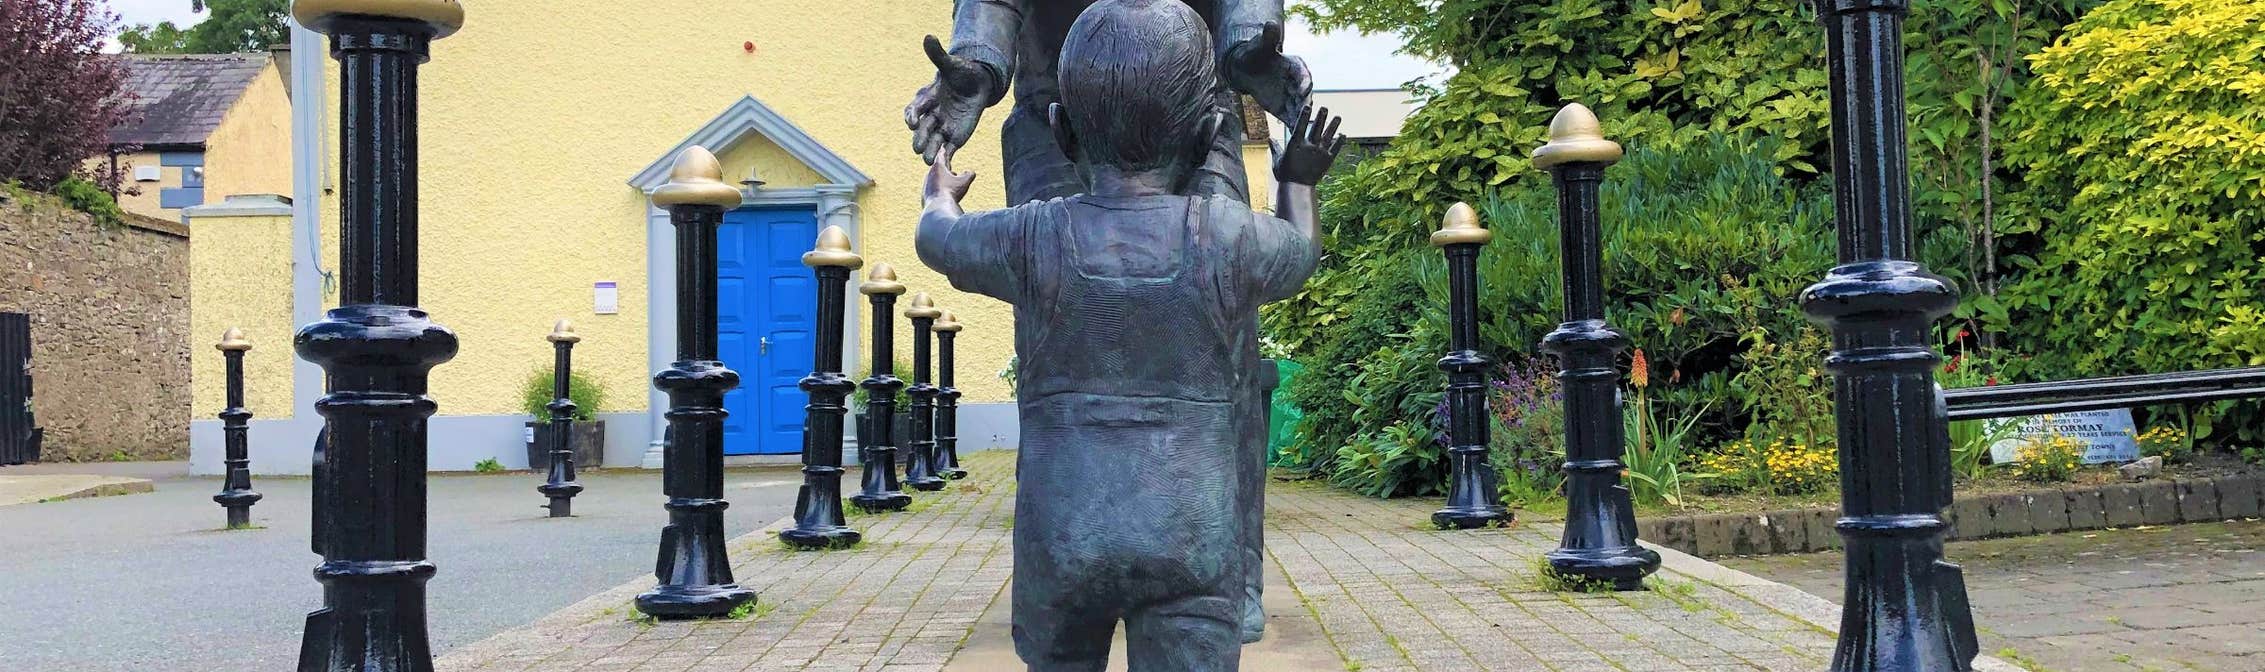 Image of a statue in Dunshaughlin in County Meath